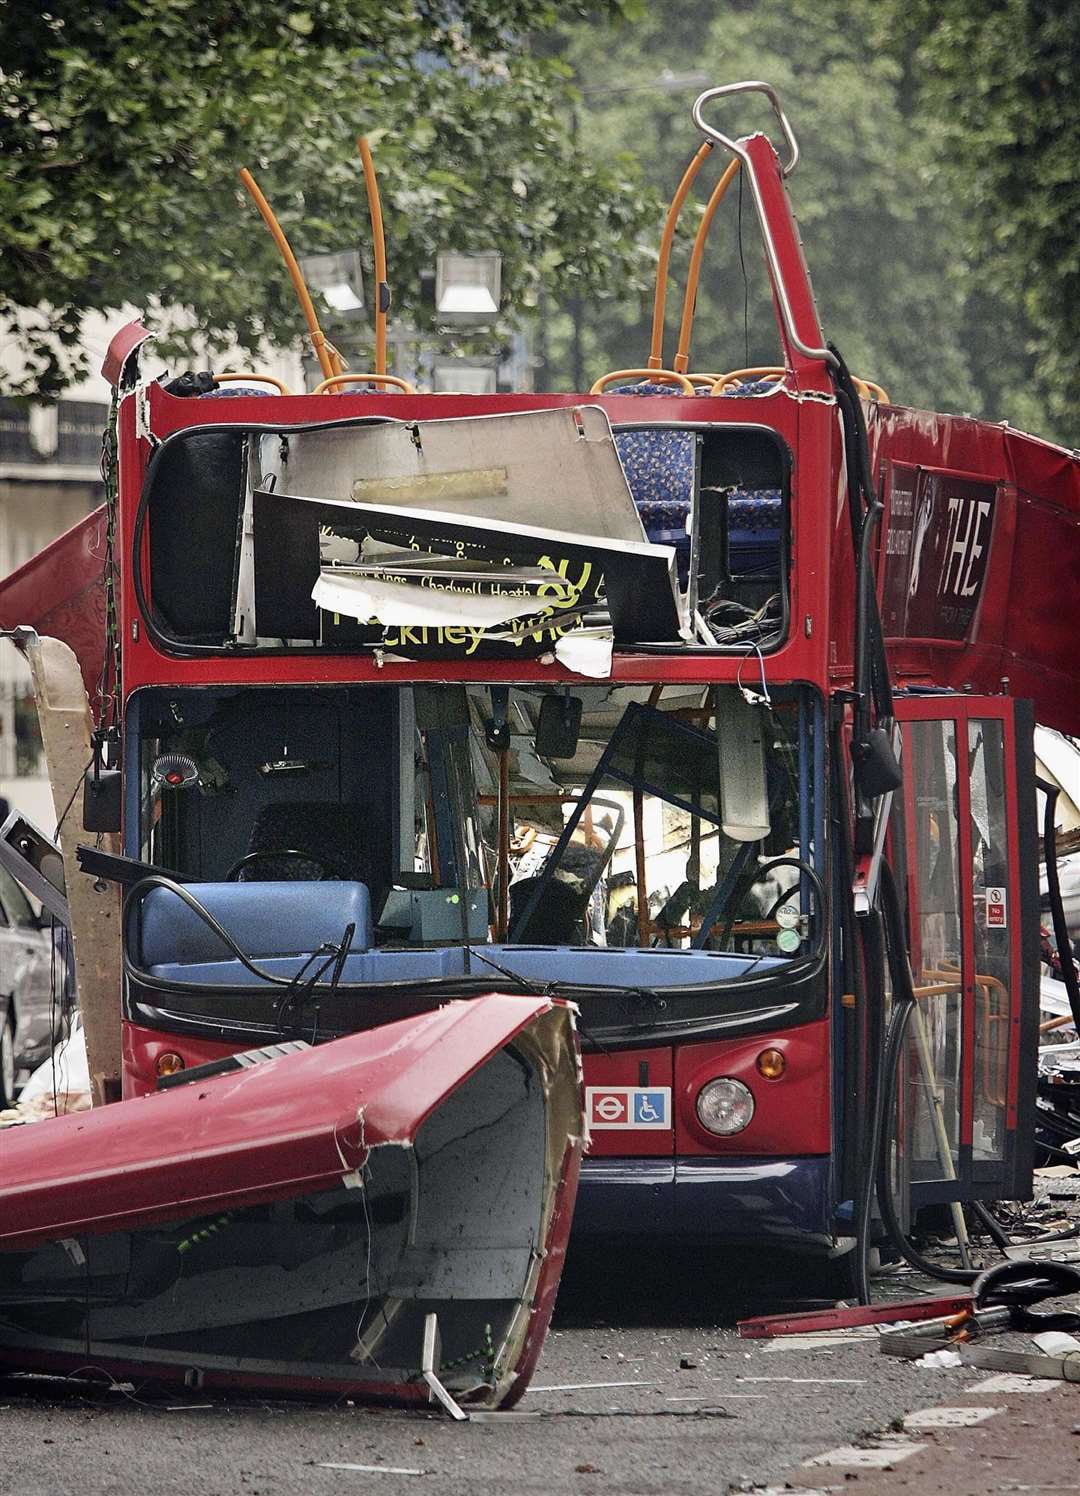 The double decker bus in Tavistock Square, which was destroyed by a terrorist bomb Picture: Peter Macdiarmid/PA.